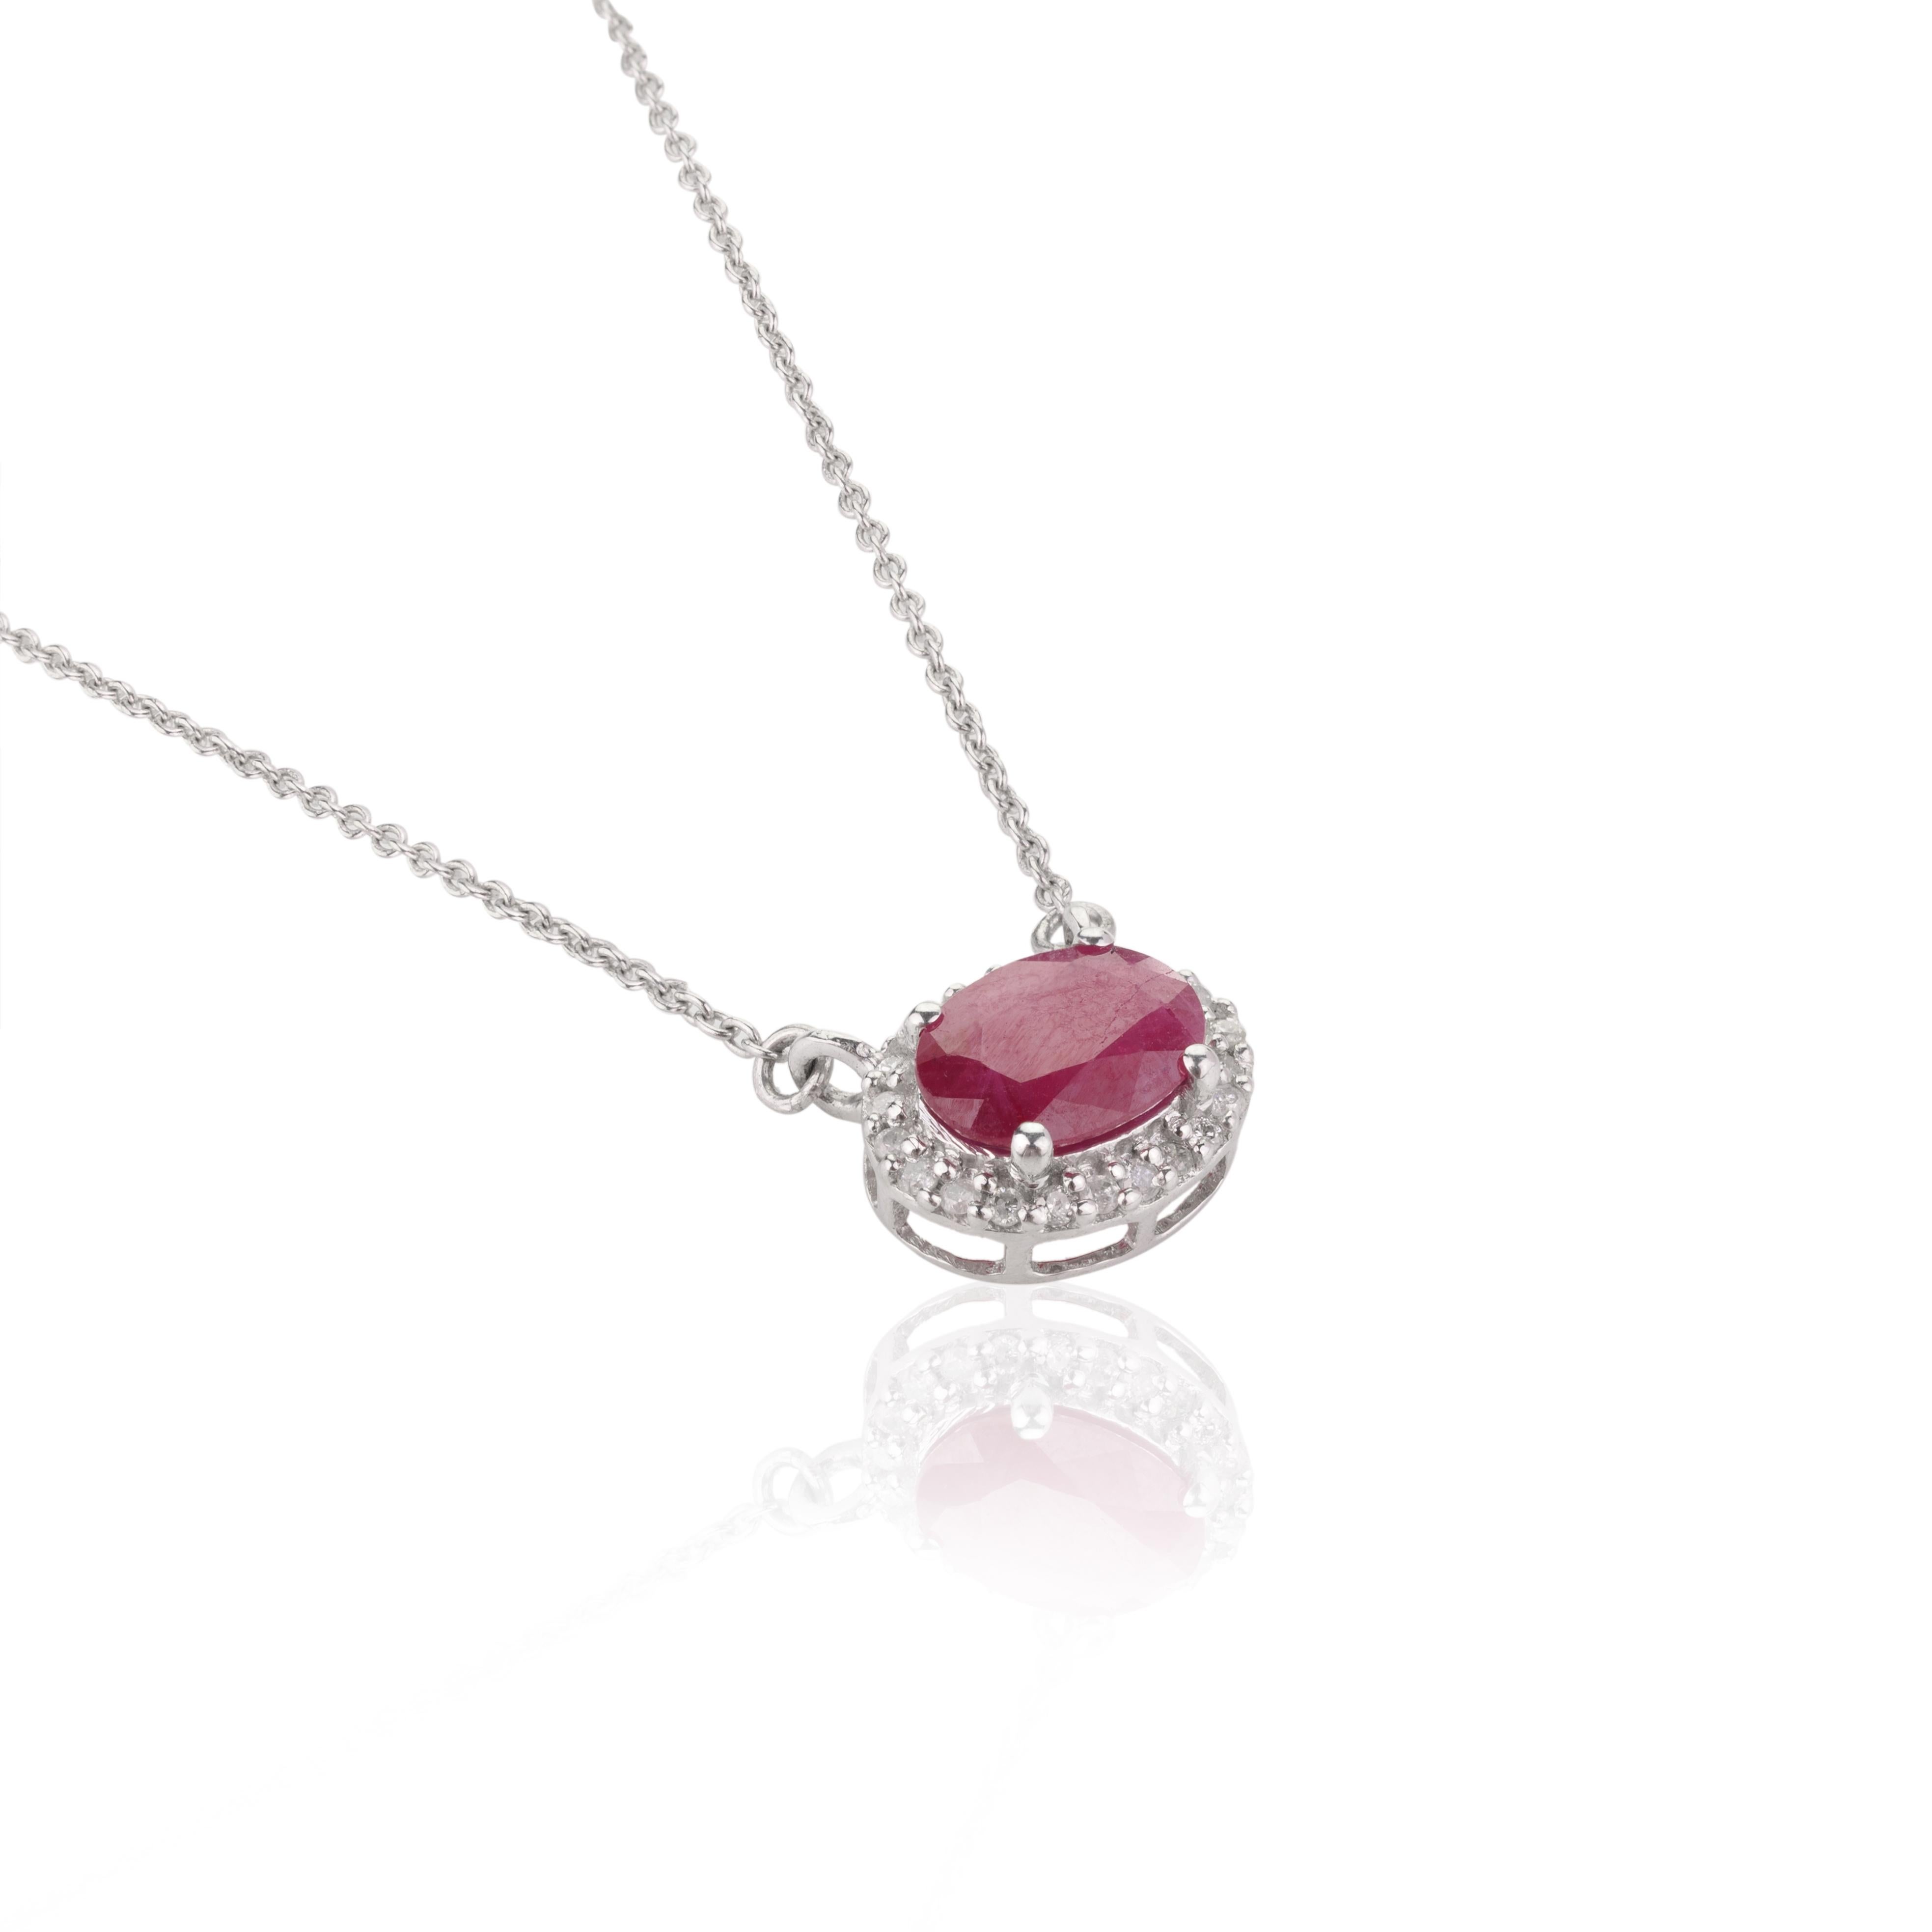 Oval Ruby and Diamond Halo Pendant Necklace in 14K Gold studded with ruby with halo of diamonds. This stunning piece of jewelry instantly elevates a casual look or dressy outfit. 
Ruby improves mental strength. 
Designed with oval cut ruby with